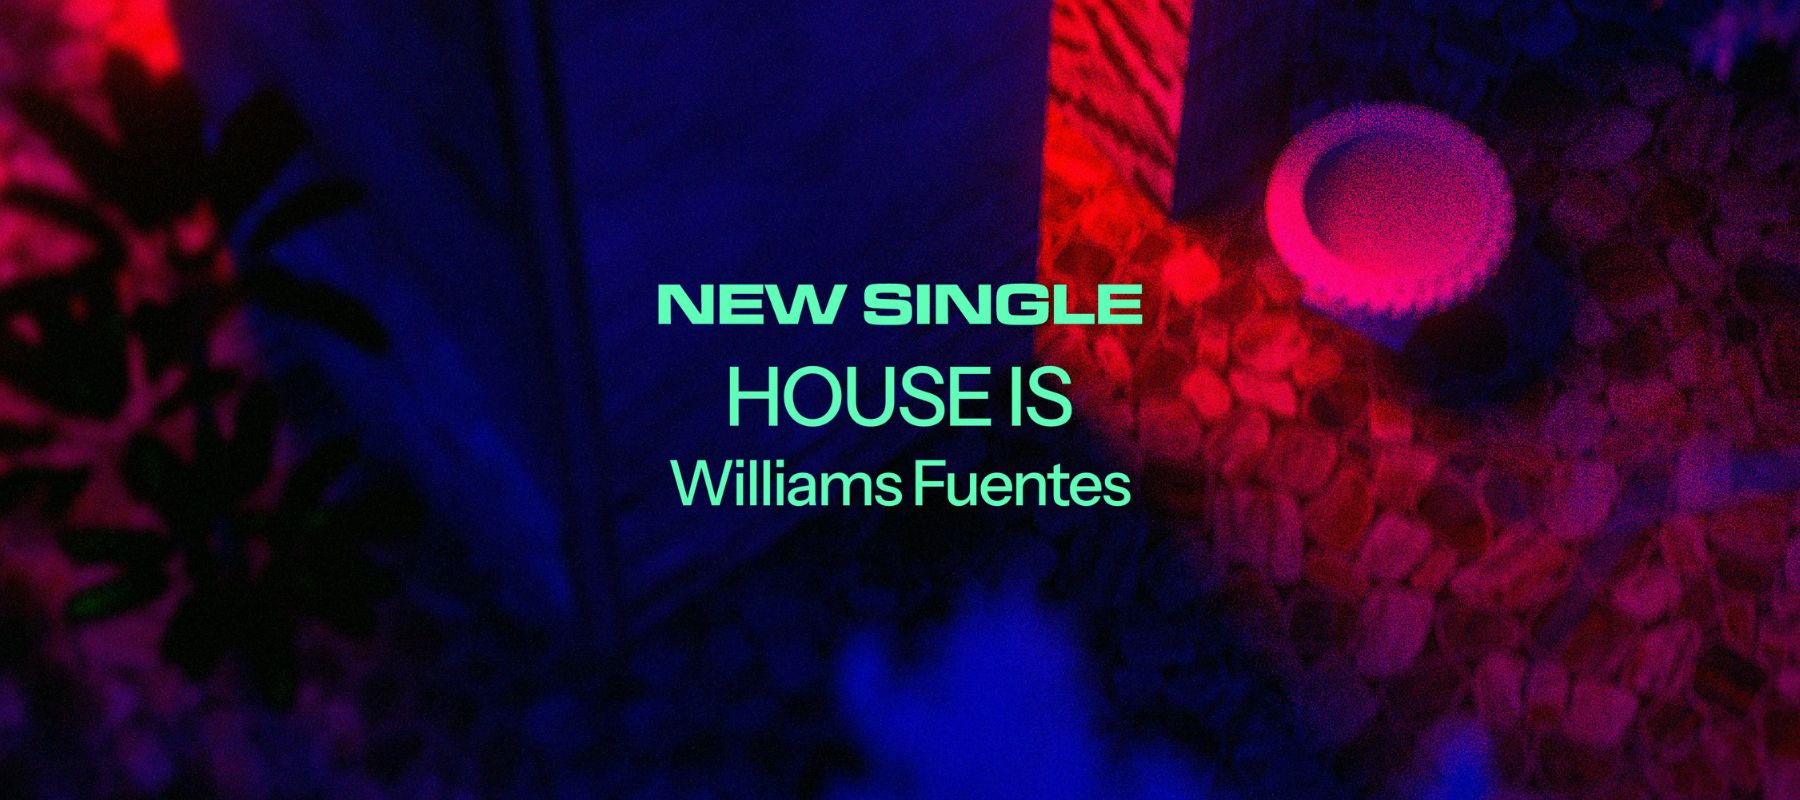 William Fuentes - House Is electronic deep house single